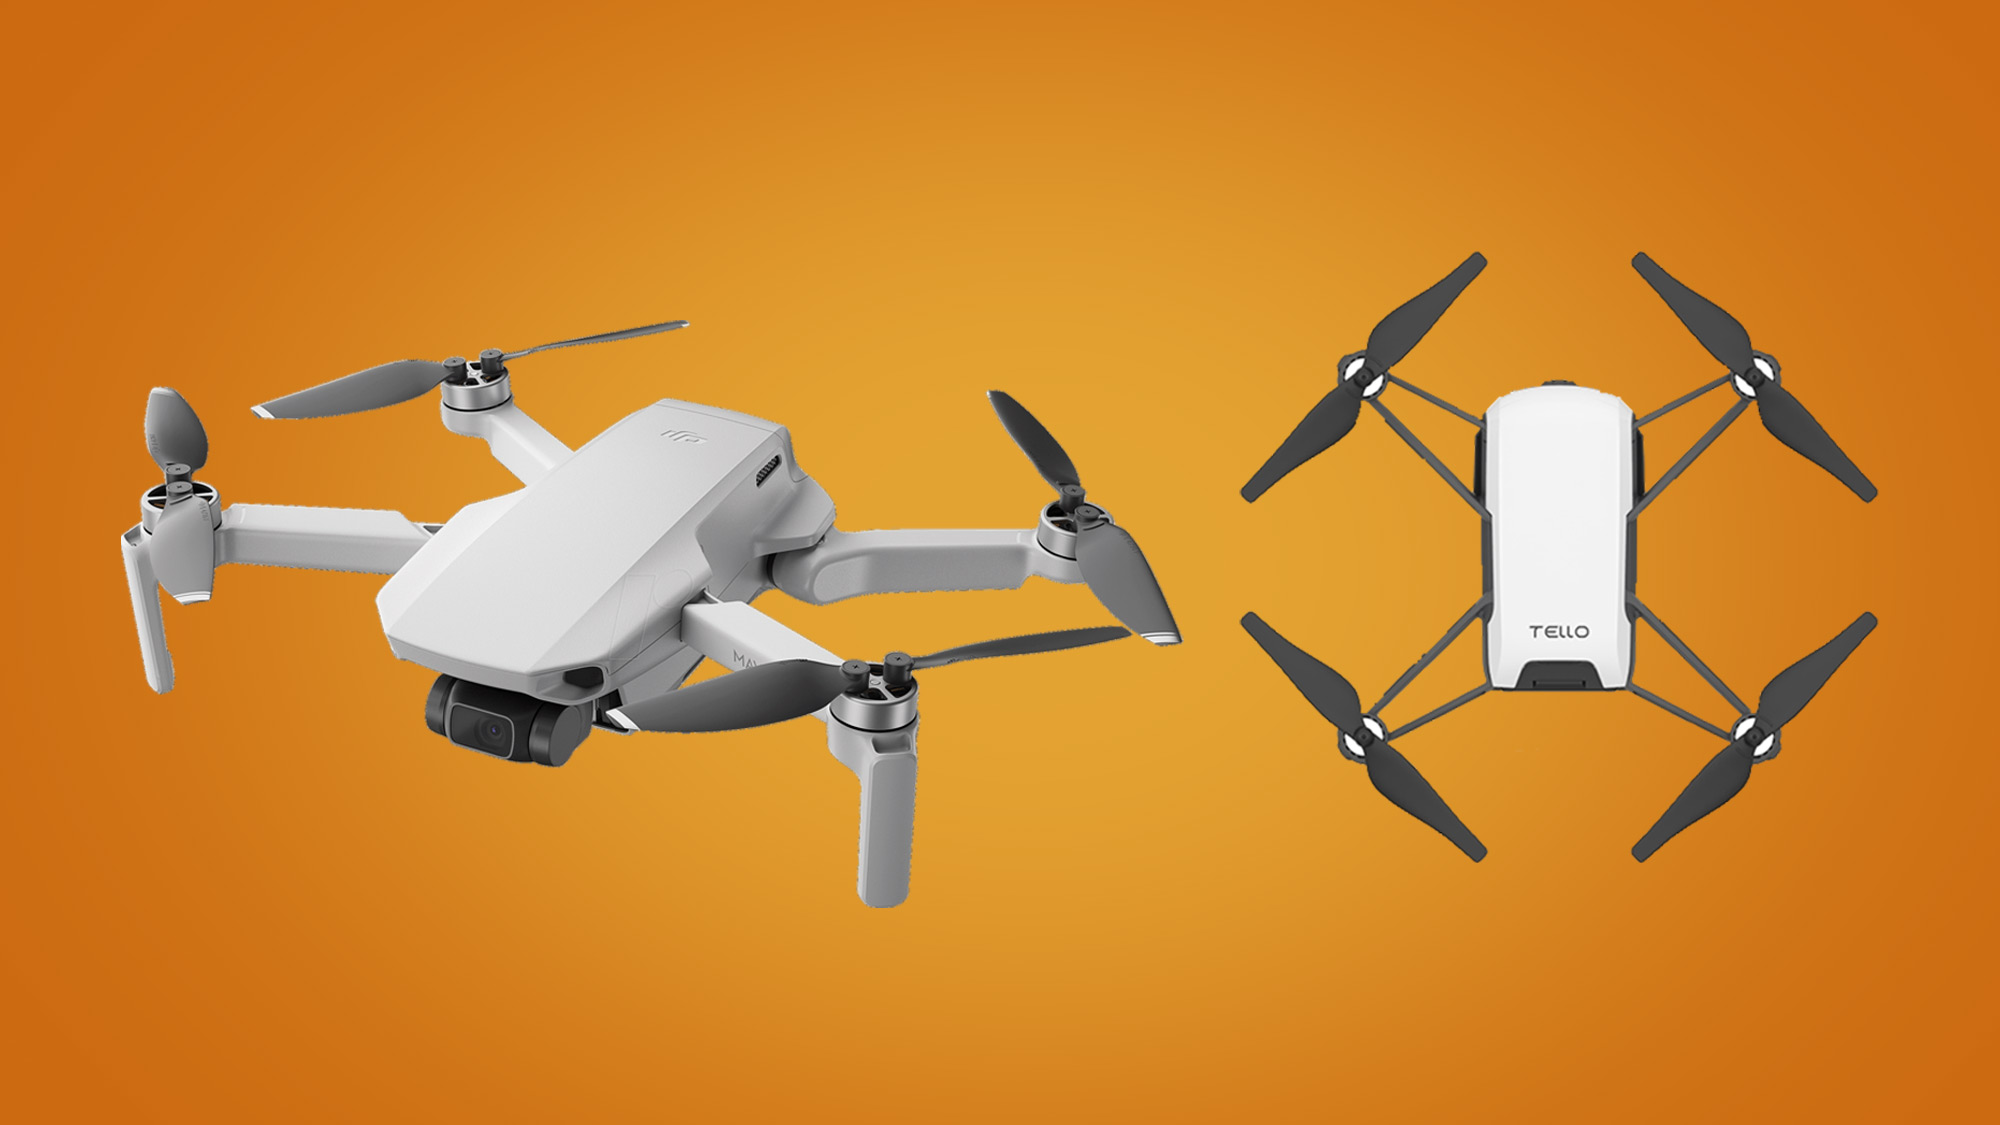 Which Is The Best Drone In Low Price?